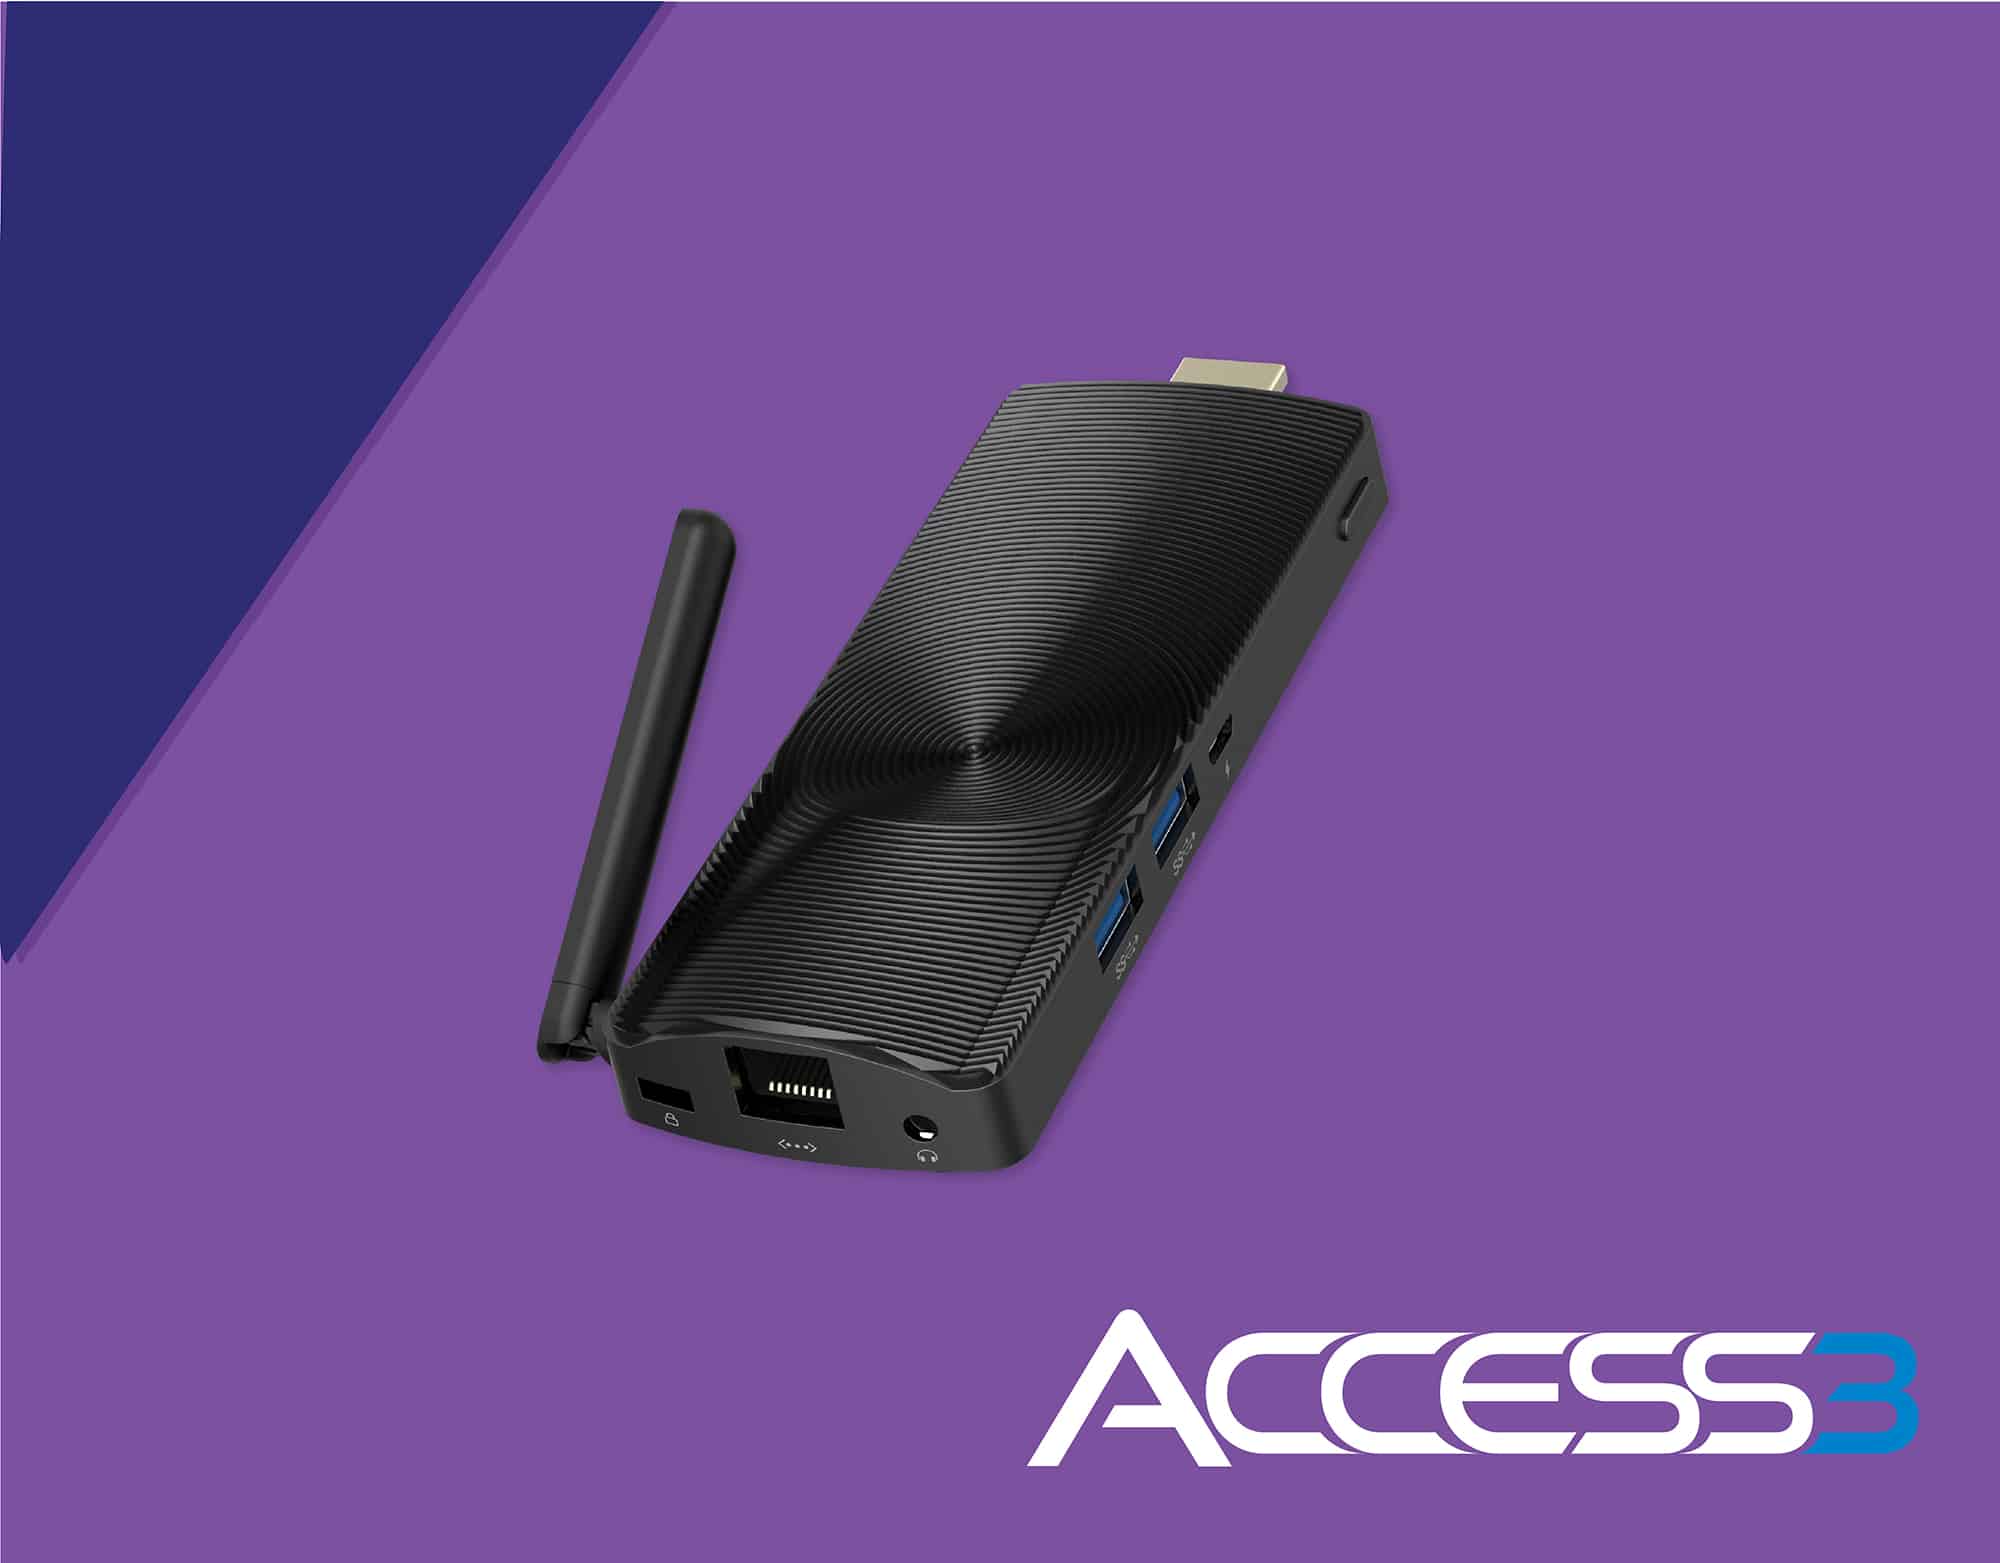 Unveiling Azulle’s Access 3: A New Level of Portable PCs